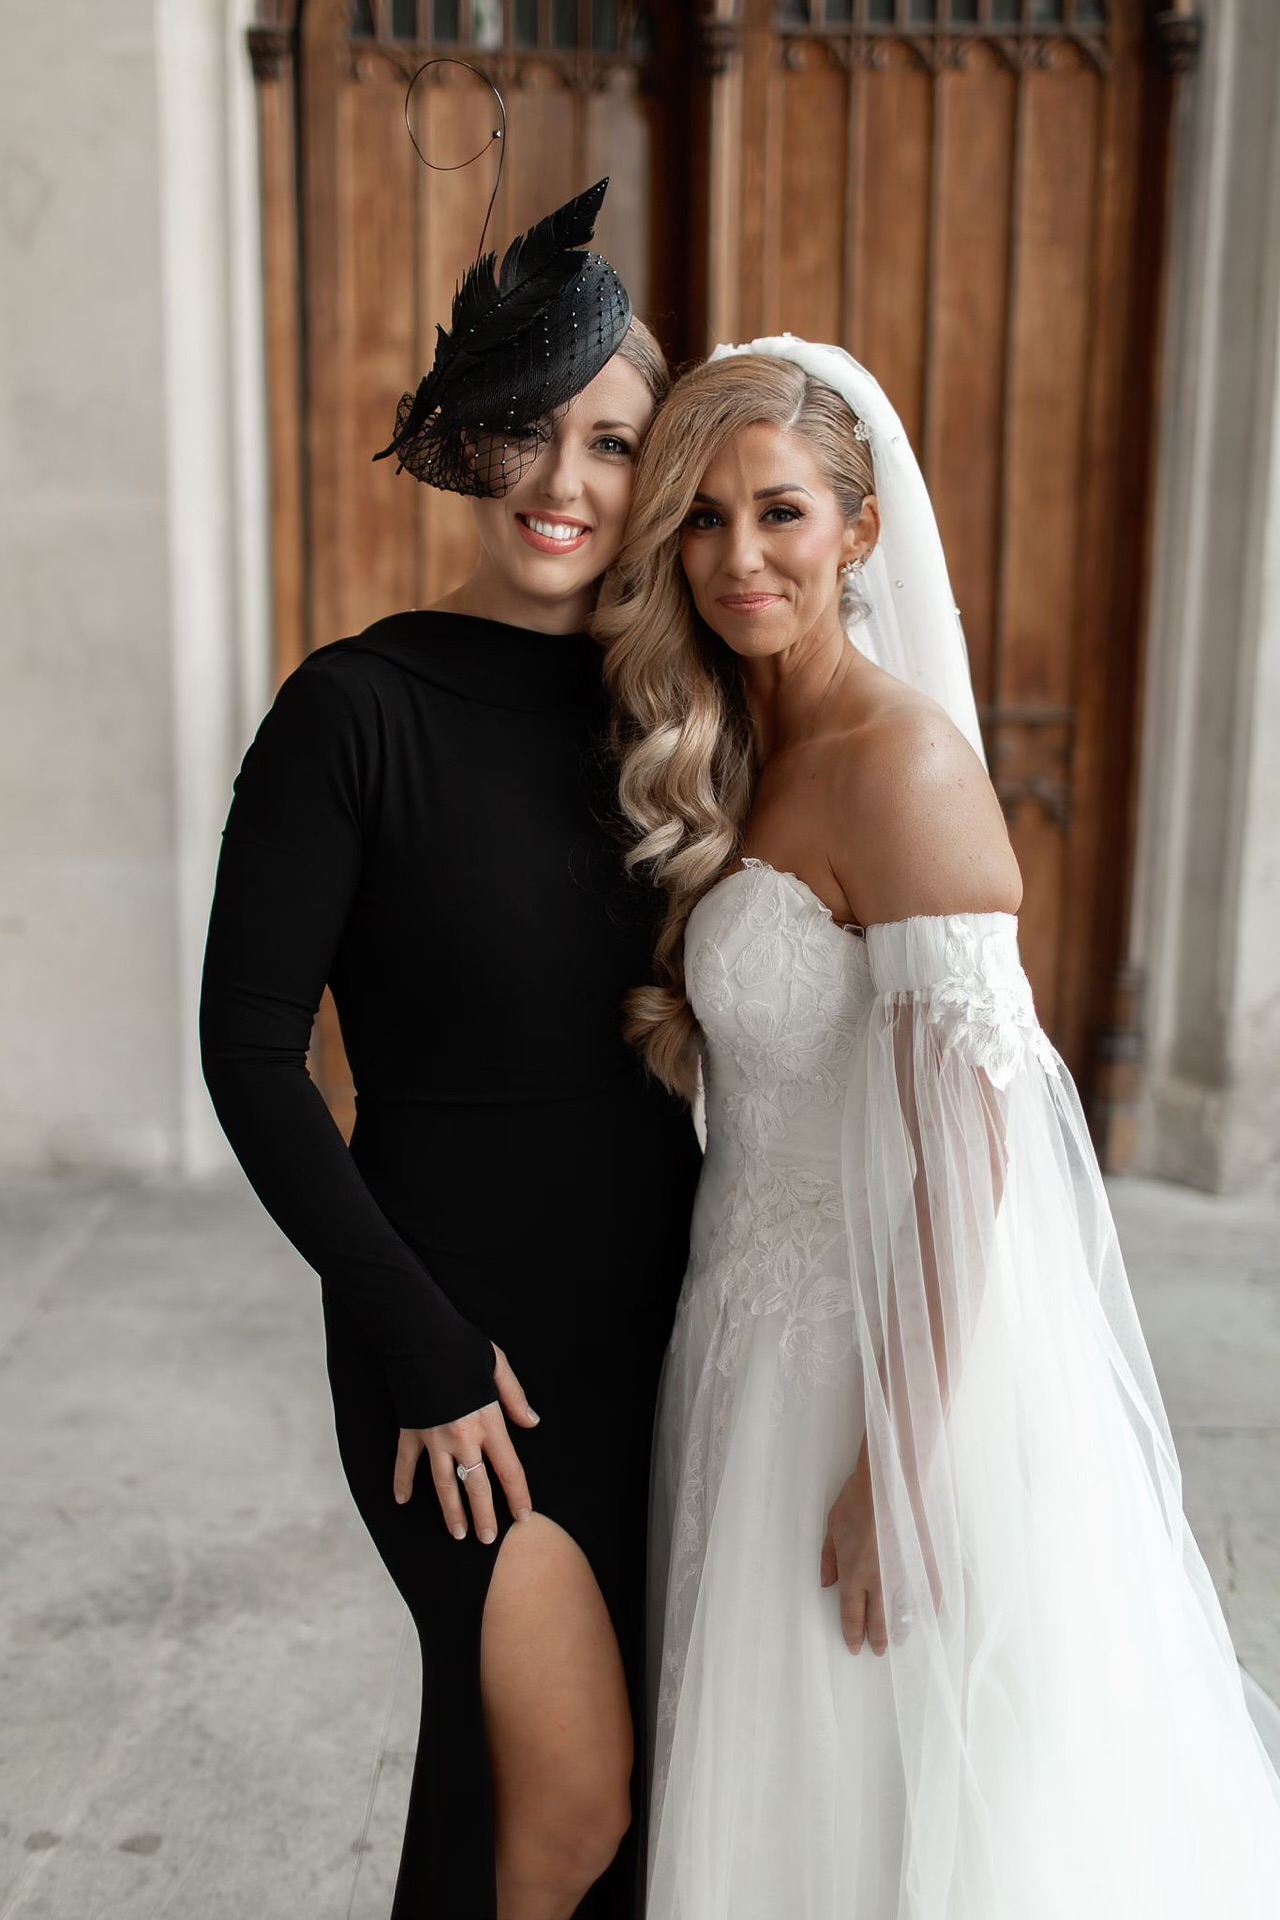 Angel Couture - A Magical Magazine Wedding